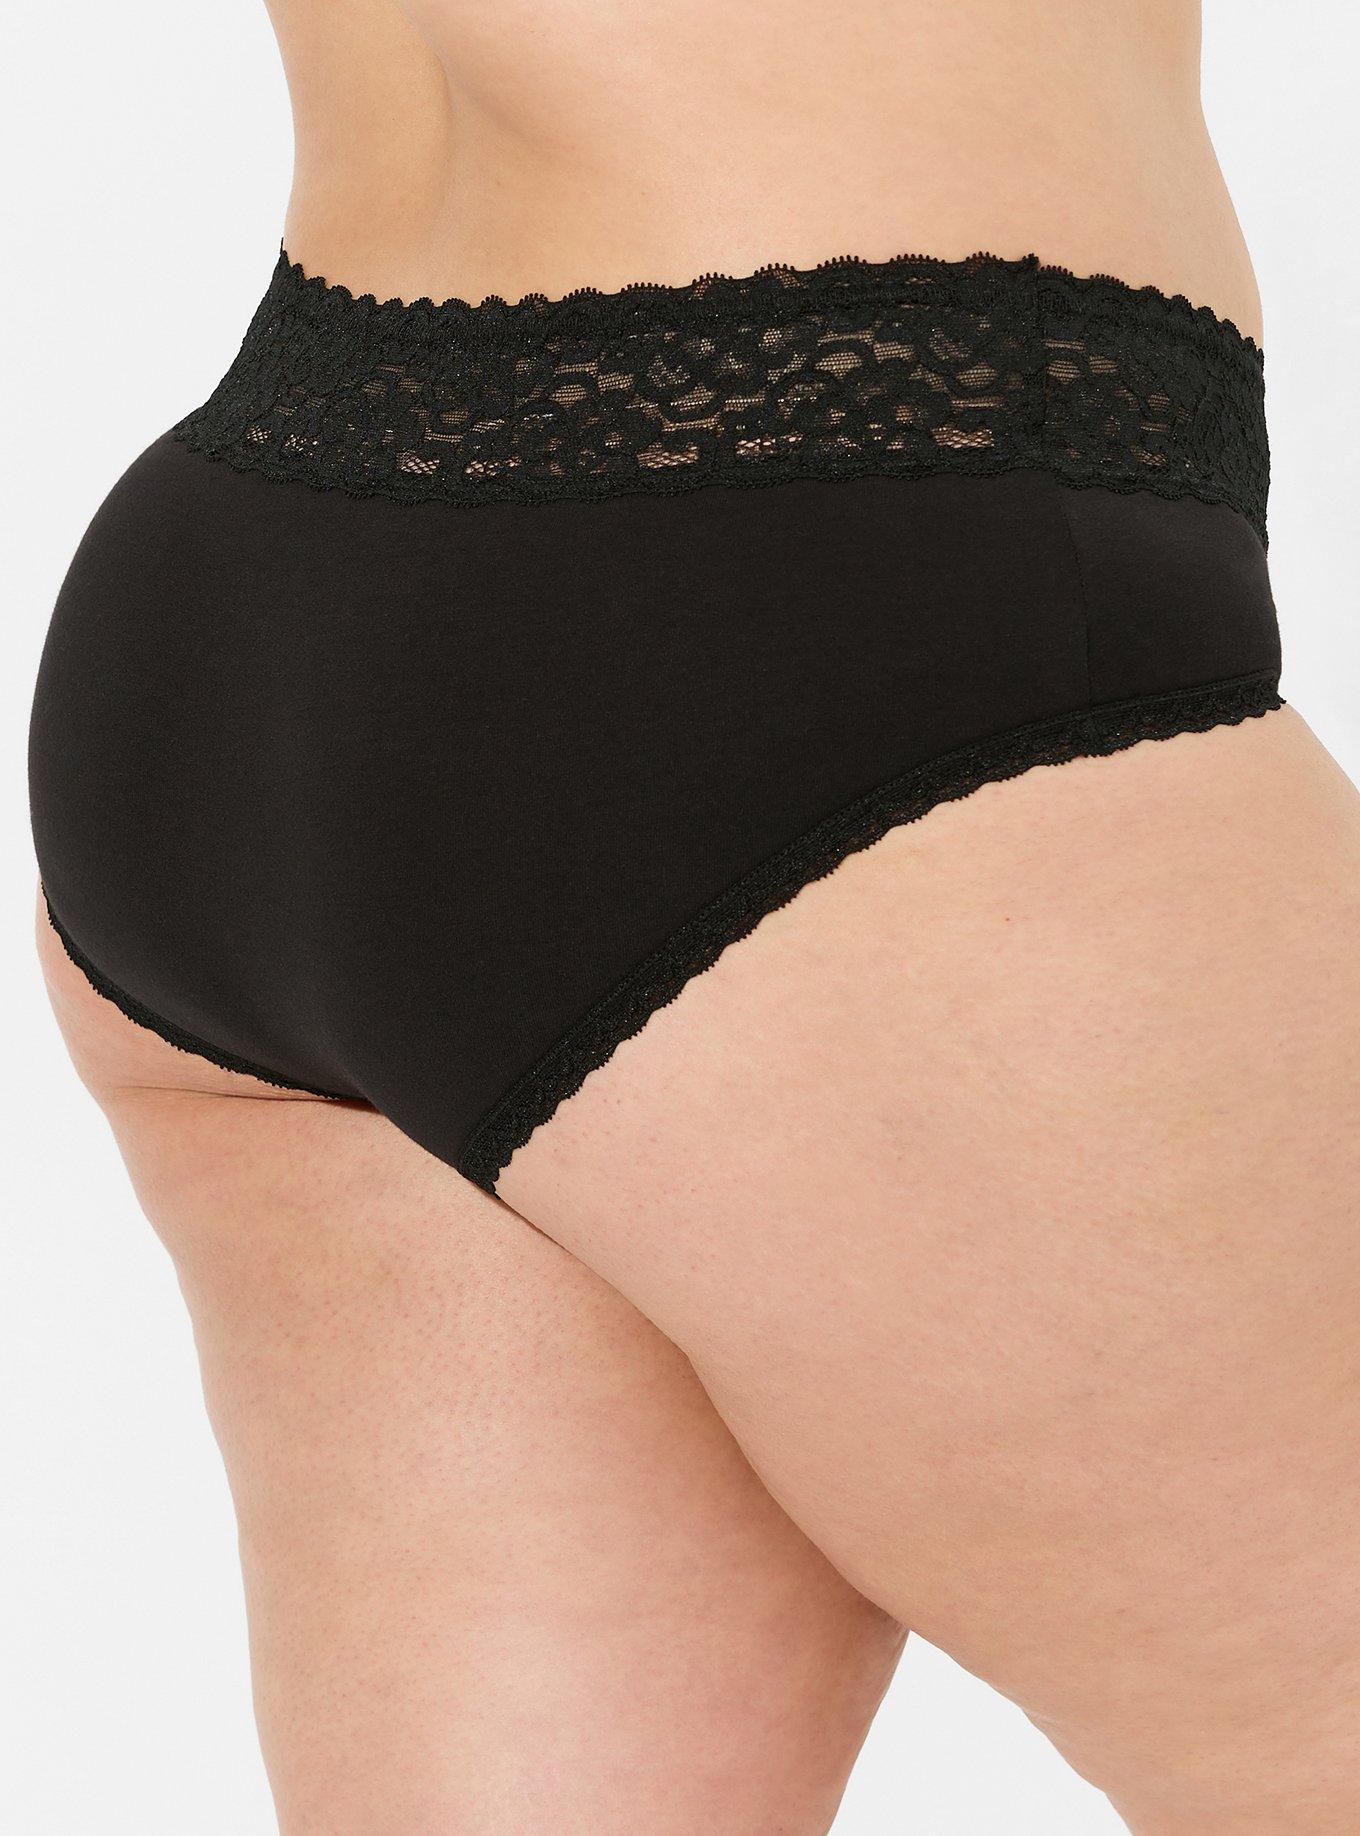 Buy DONSON High Waist Cotton and Spandex Underwear Soft Breathable